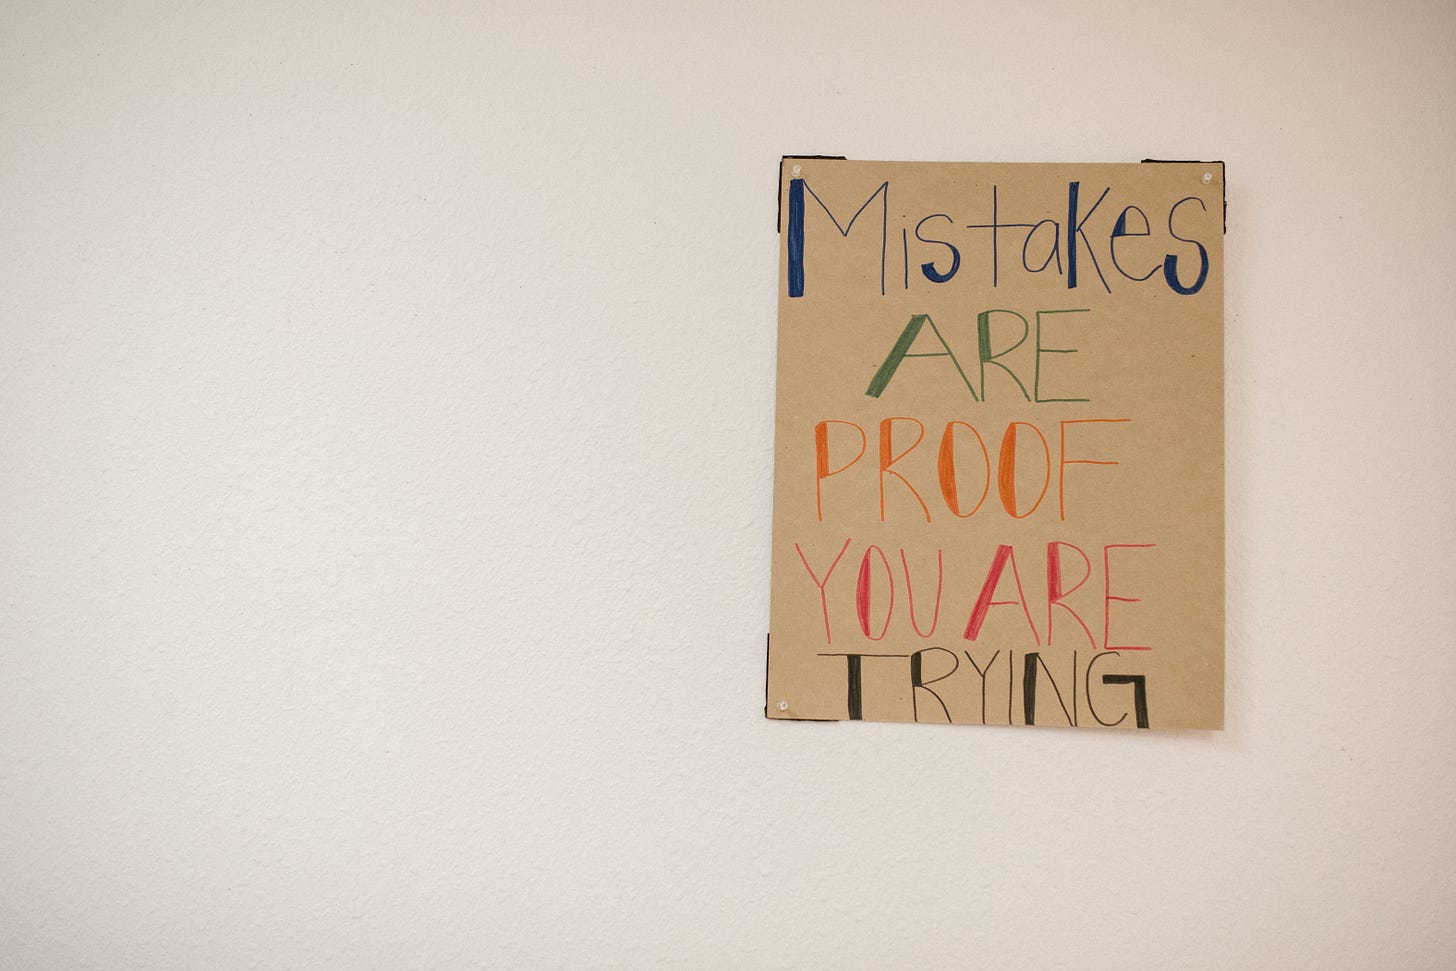 Mistakes are proof you are trying quote picture hand written with multi colors of Blue, Green, Orange and red